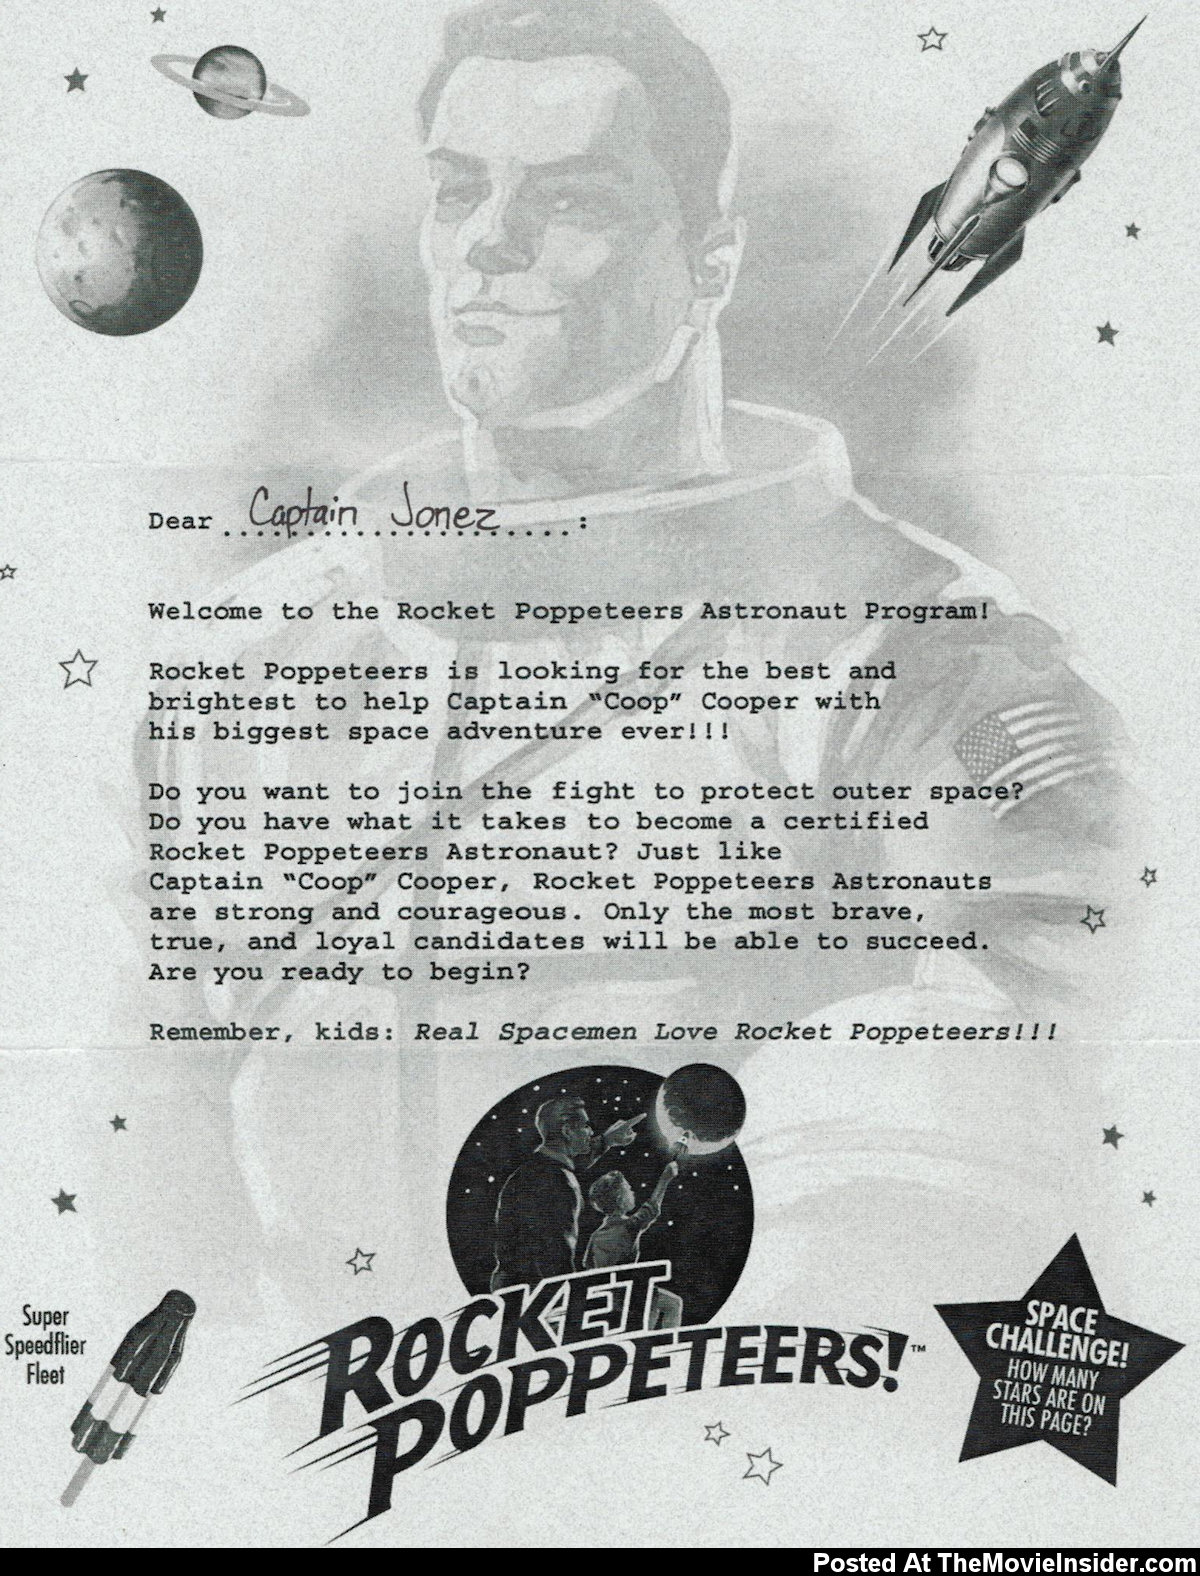  Rocket Poppeteers! letter mailed from a Super 8 viral site. Captain Jonez was the nickname the reader gave himself when he wrote into to the Super 8 site. No doubt there is a secret message hidden in the letter. If you can figure it out, please contact this site and we will post an update.